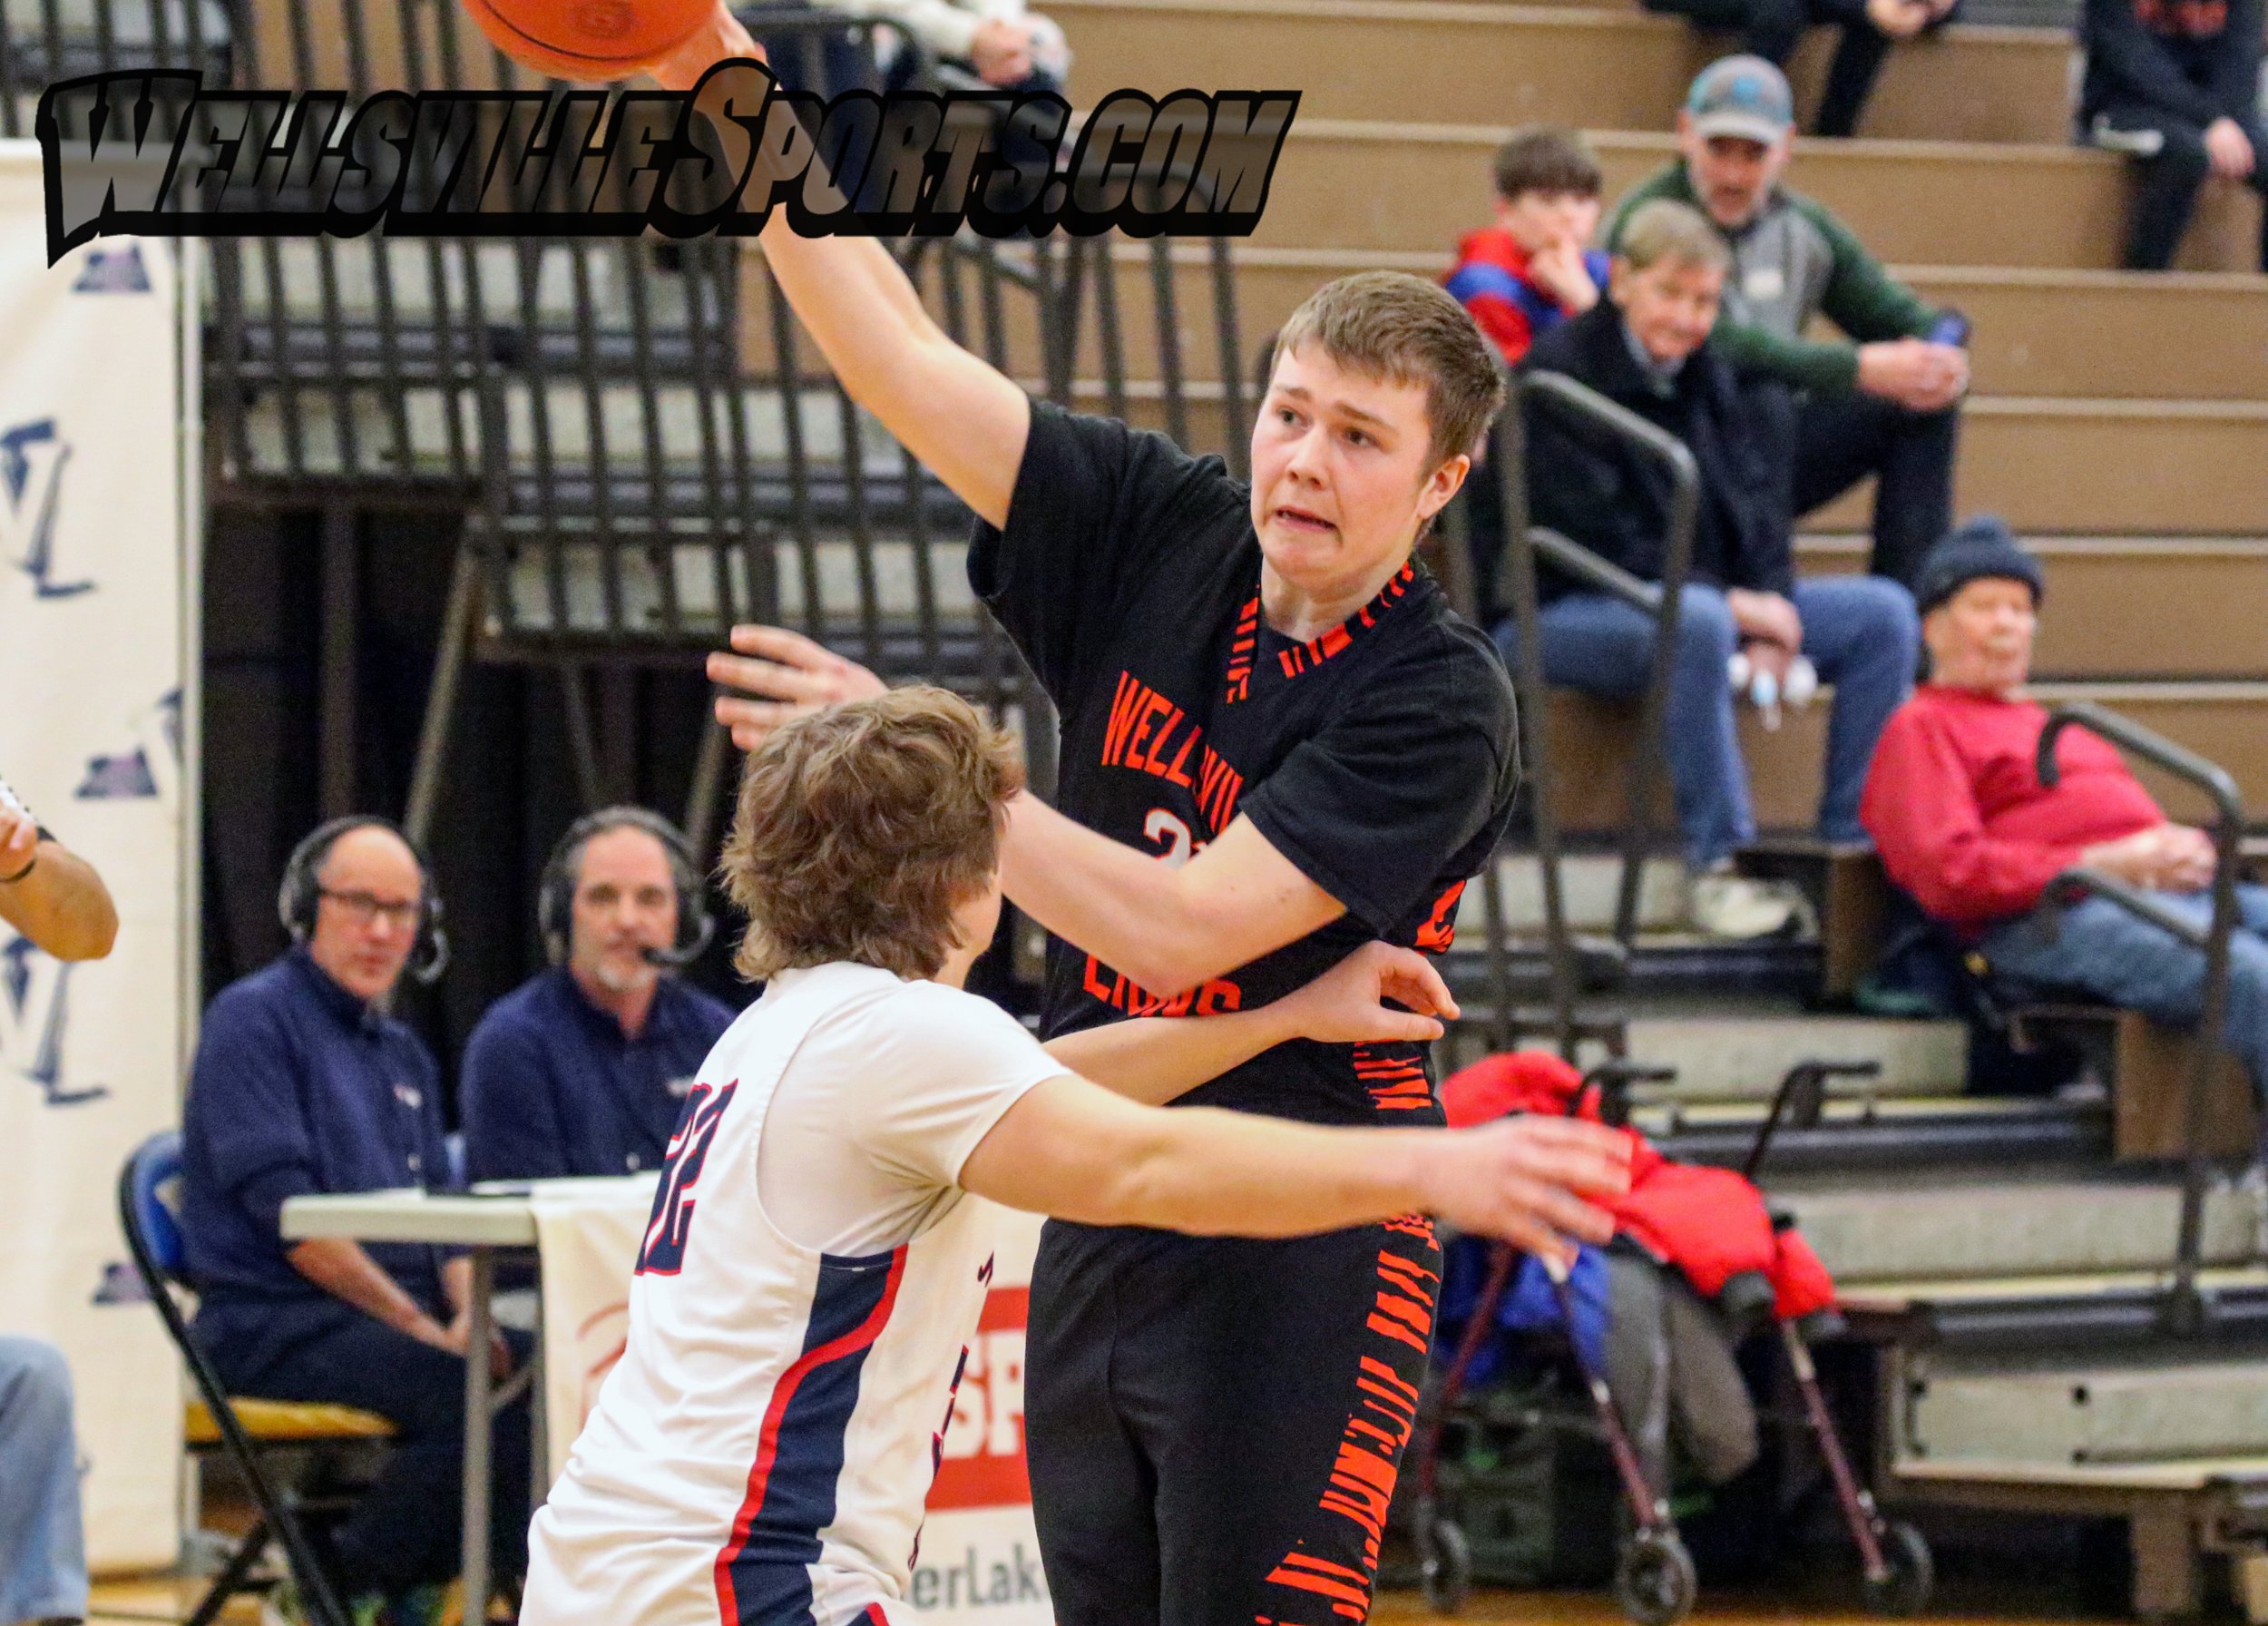  Wellsville senior Kailob Phelps, middle, fires a pass into the open wing while the Mynderse defense keeps watch during Saturday afternoon’s Class B2 Finals in Webster. [Chris Brooks/WellsvilleSports.com] 